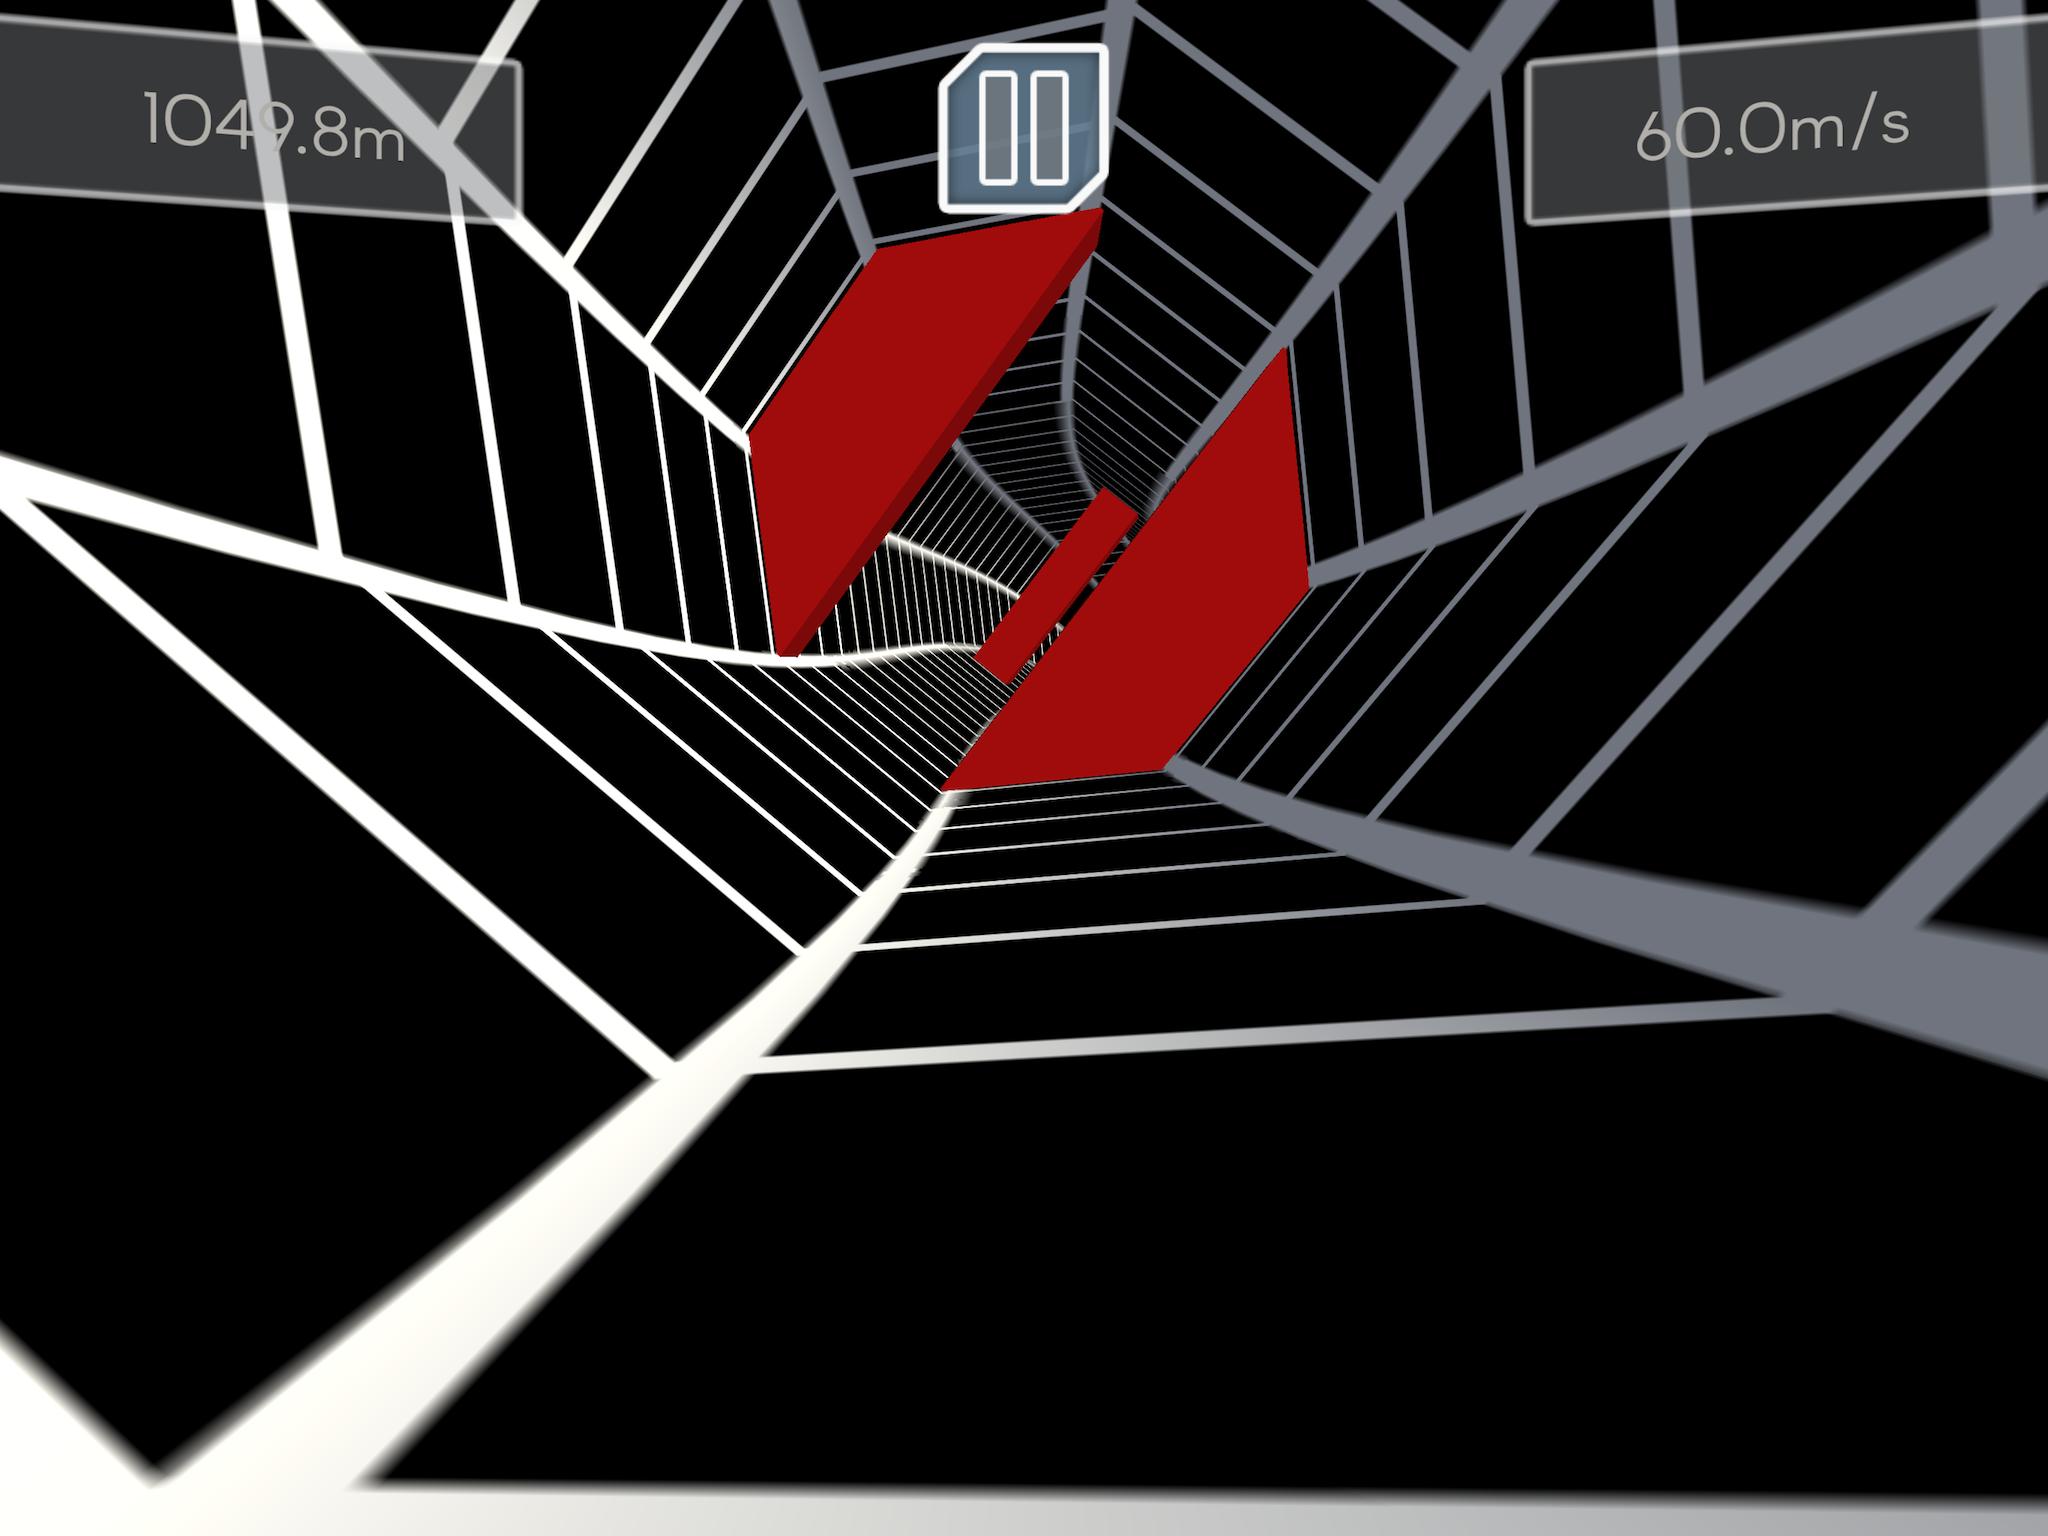 Tunnel Rush - APK Download for Android